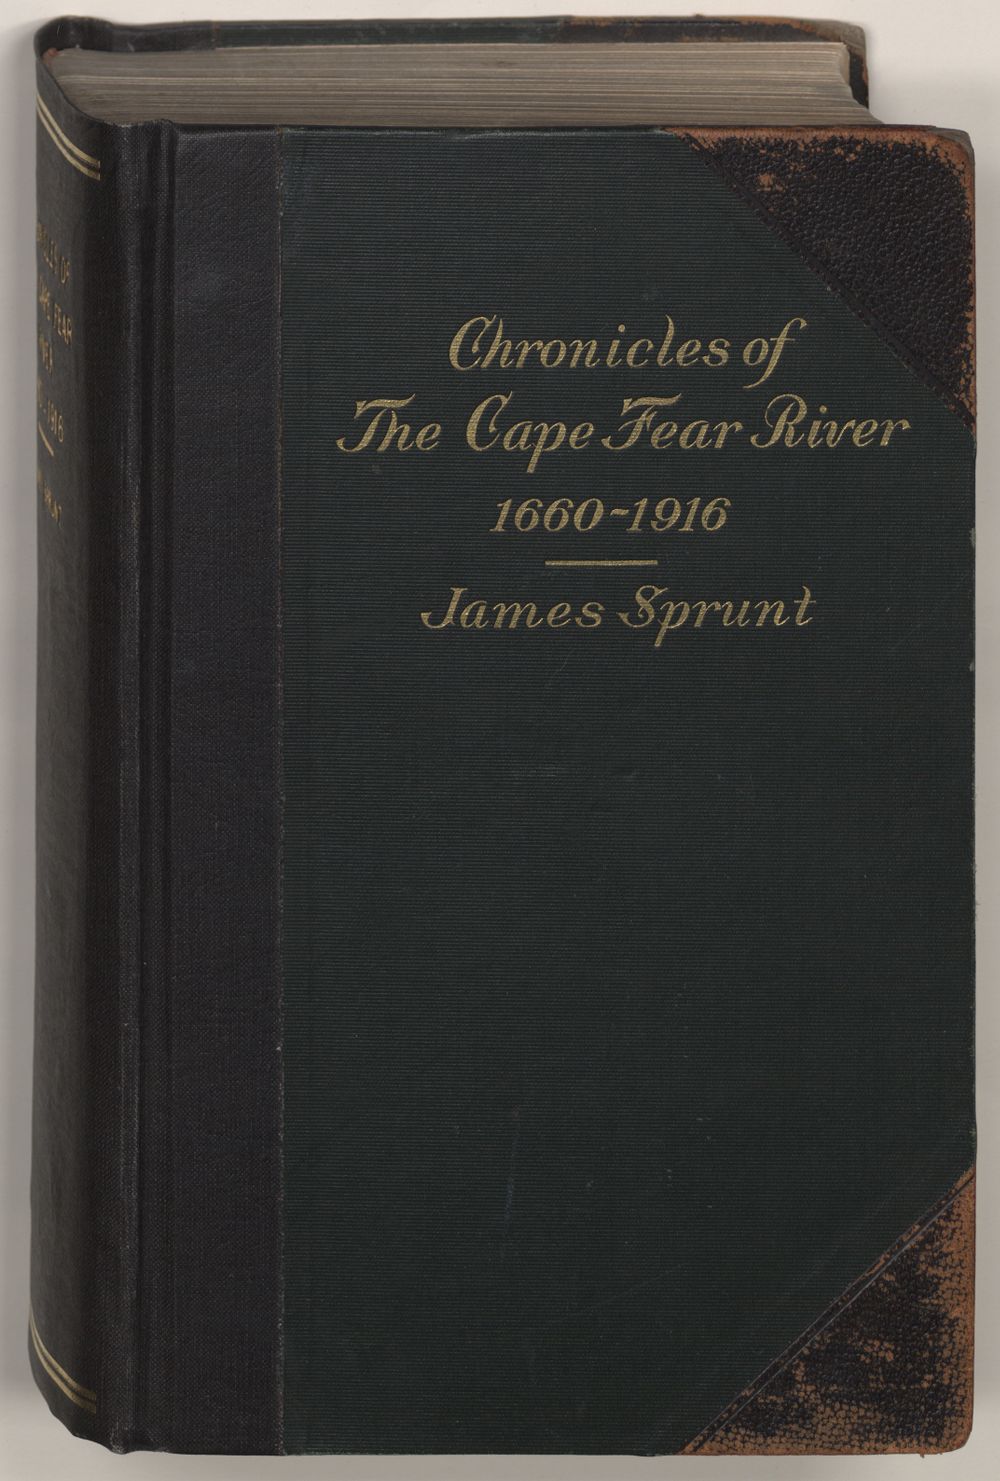 Chronicles of the Cape Fear river, 1660-1916 image